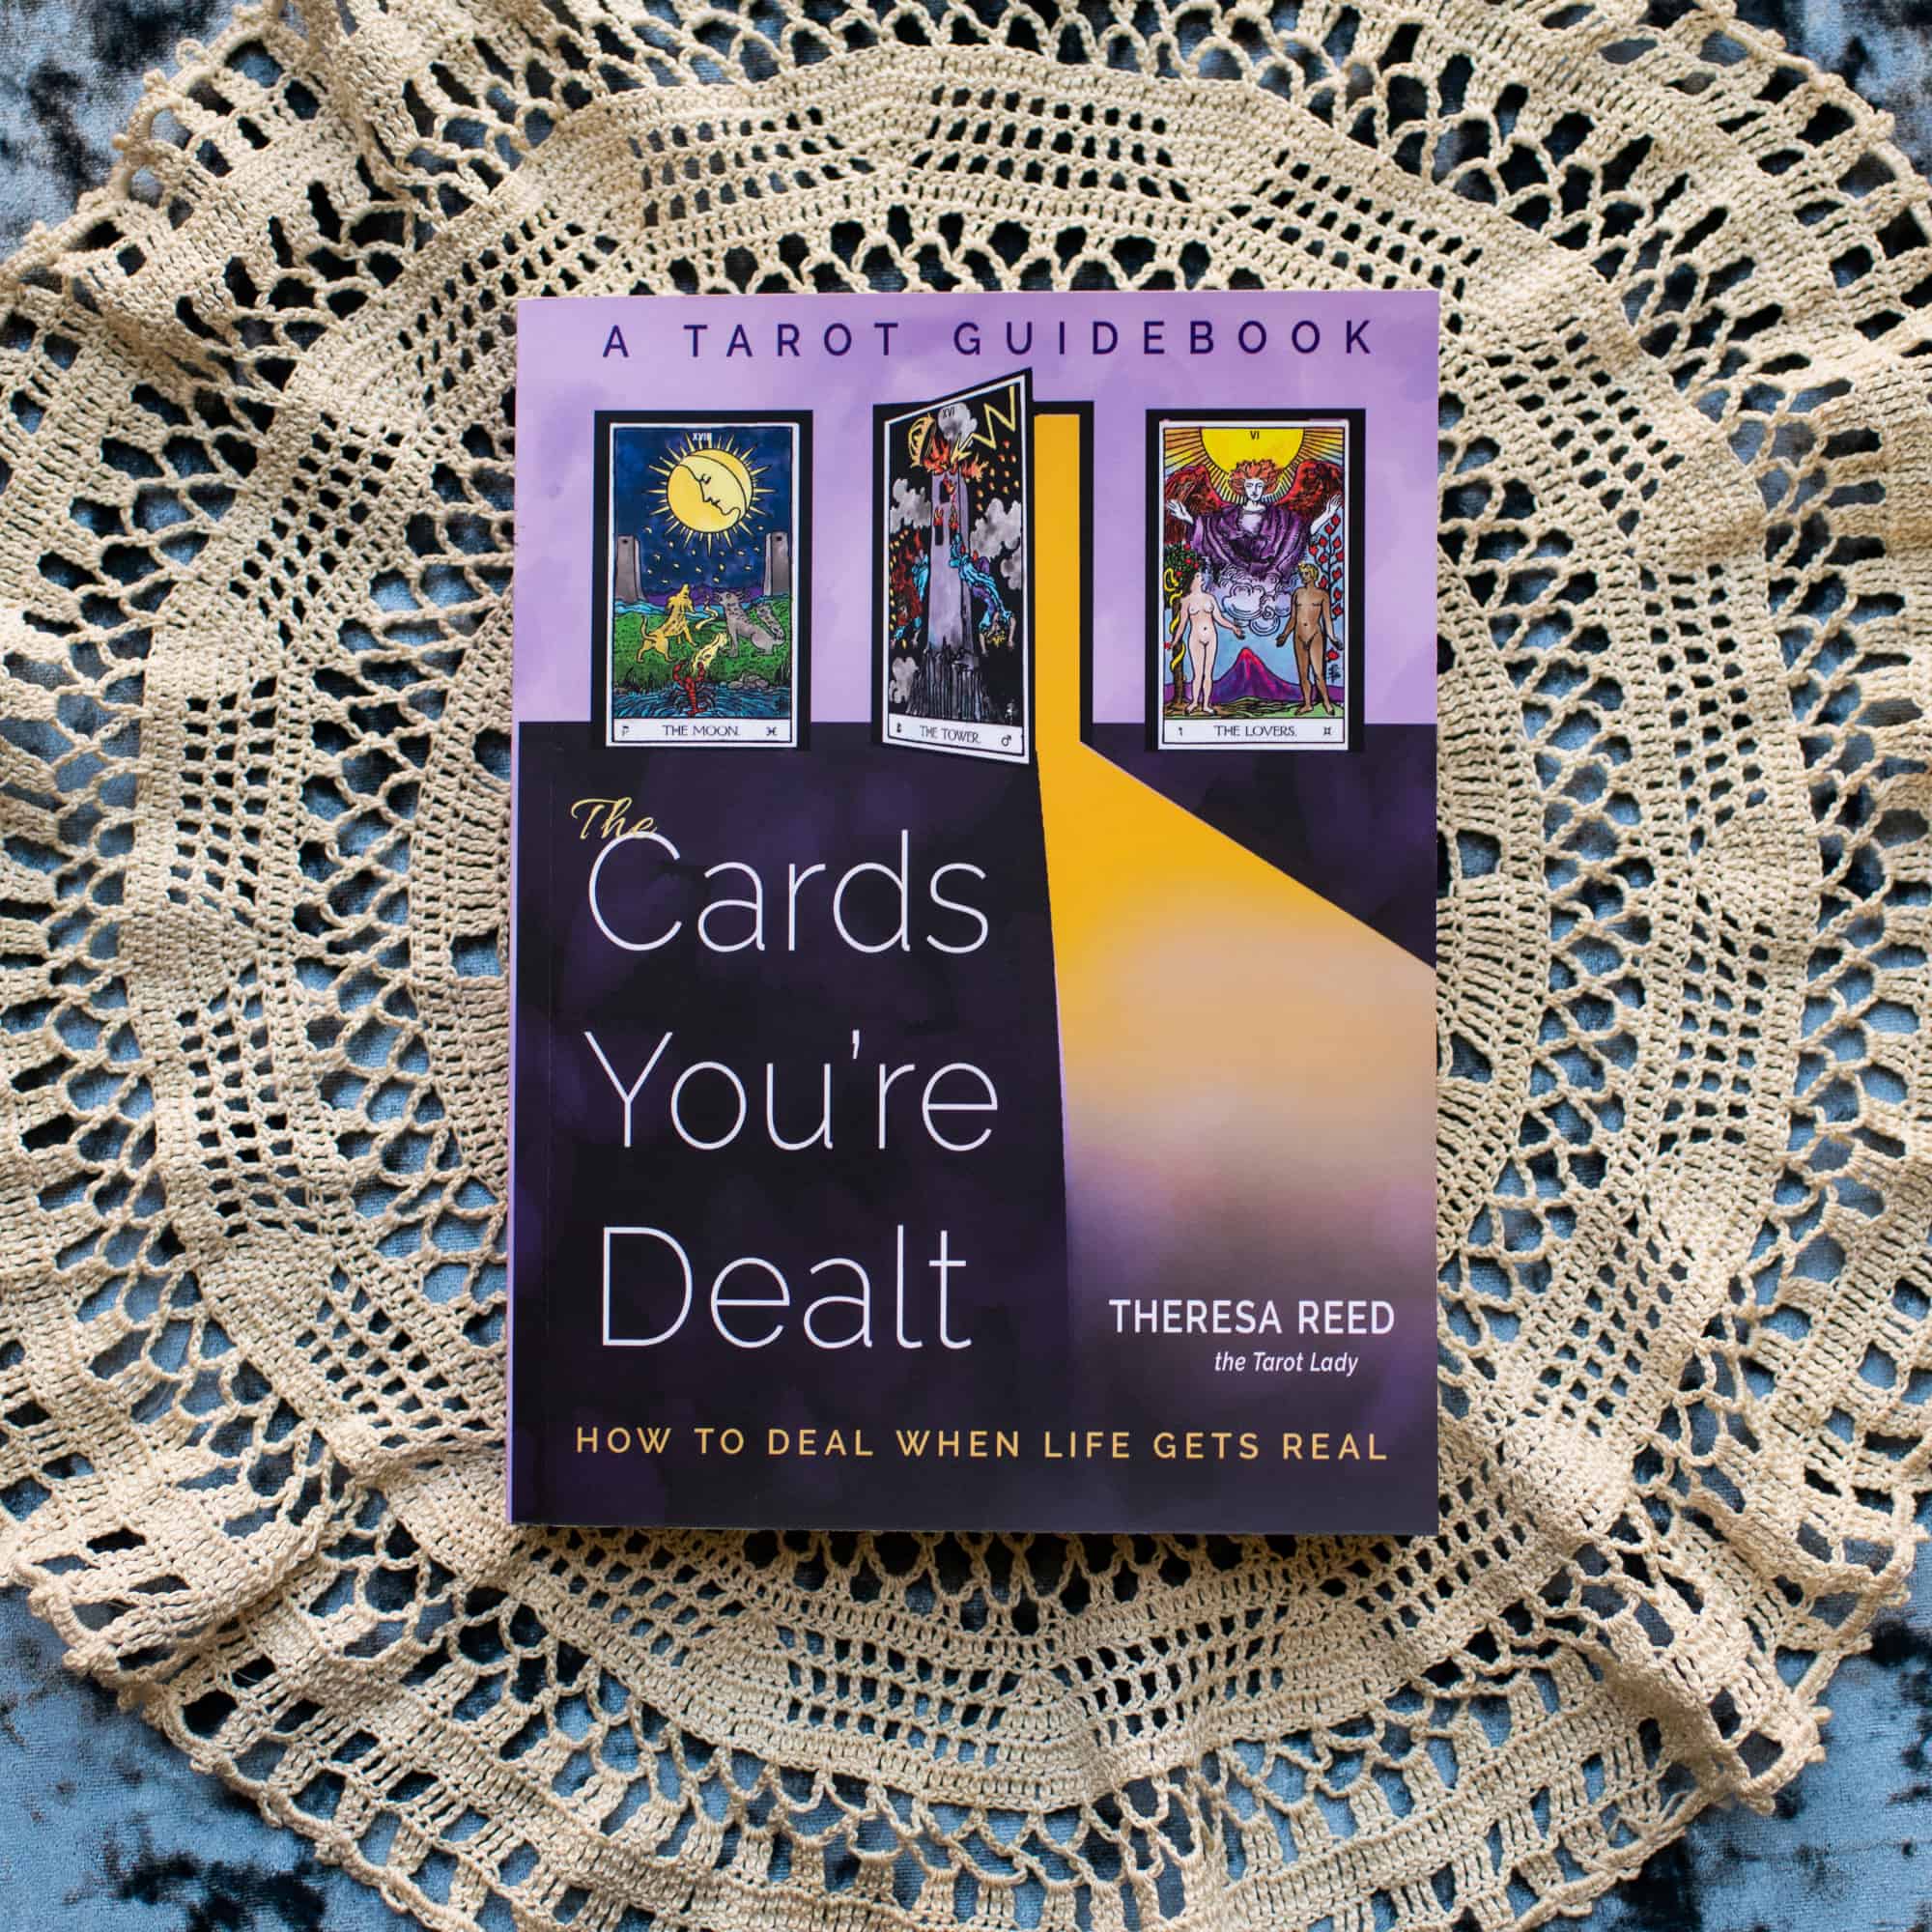 The Cards You're Dealt - A Tarot Guide Book by Theresa Reed